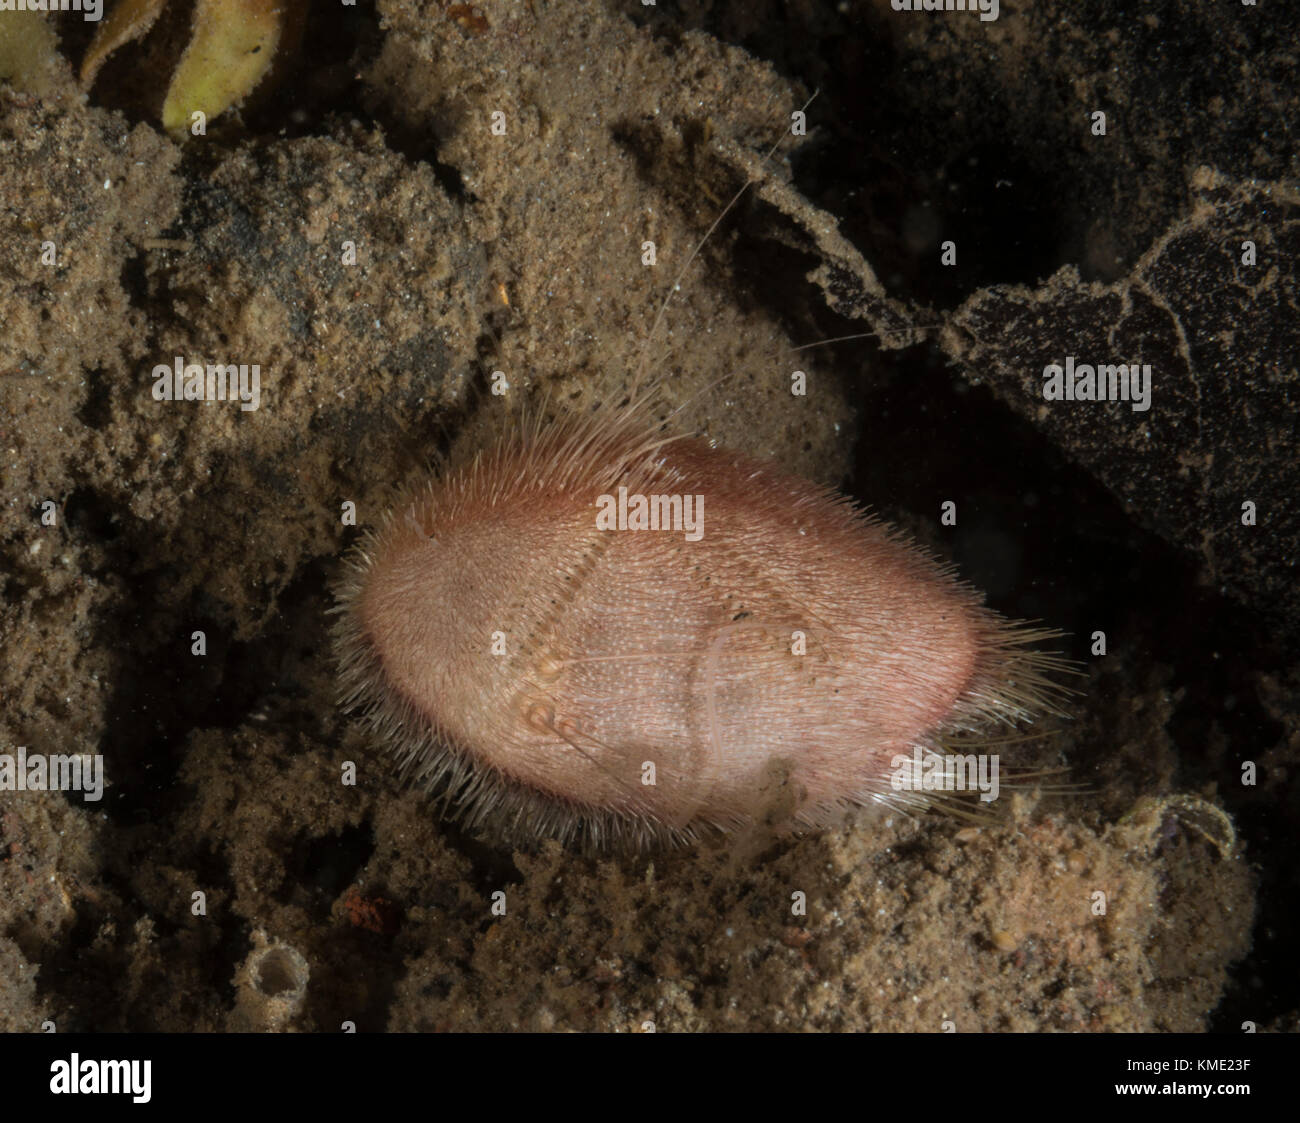 Long-spined heart urchin on a rock Stock Photo